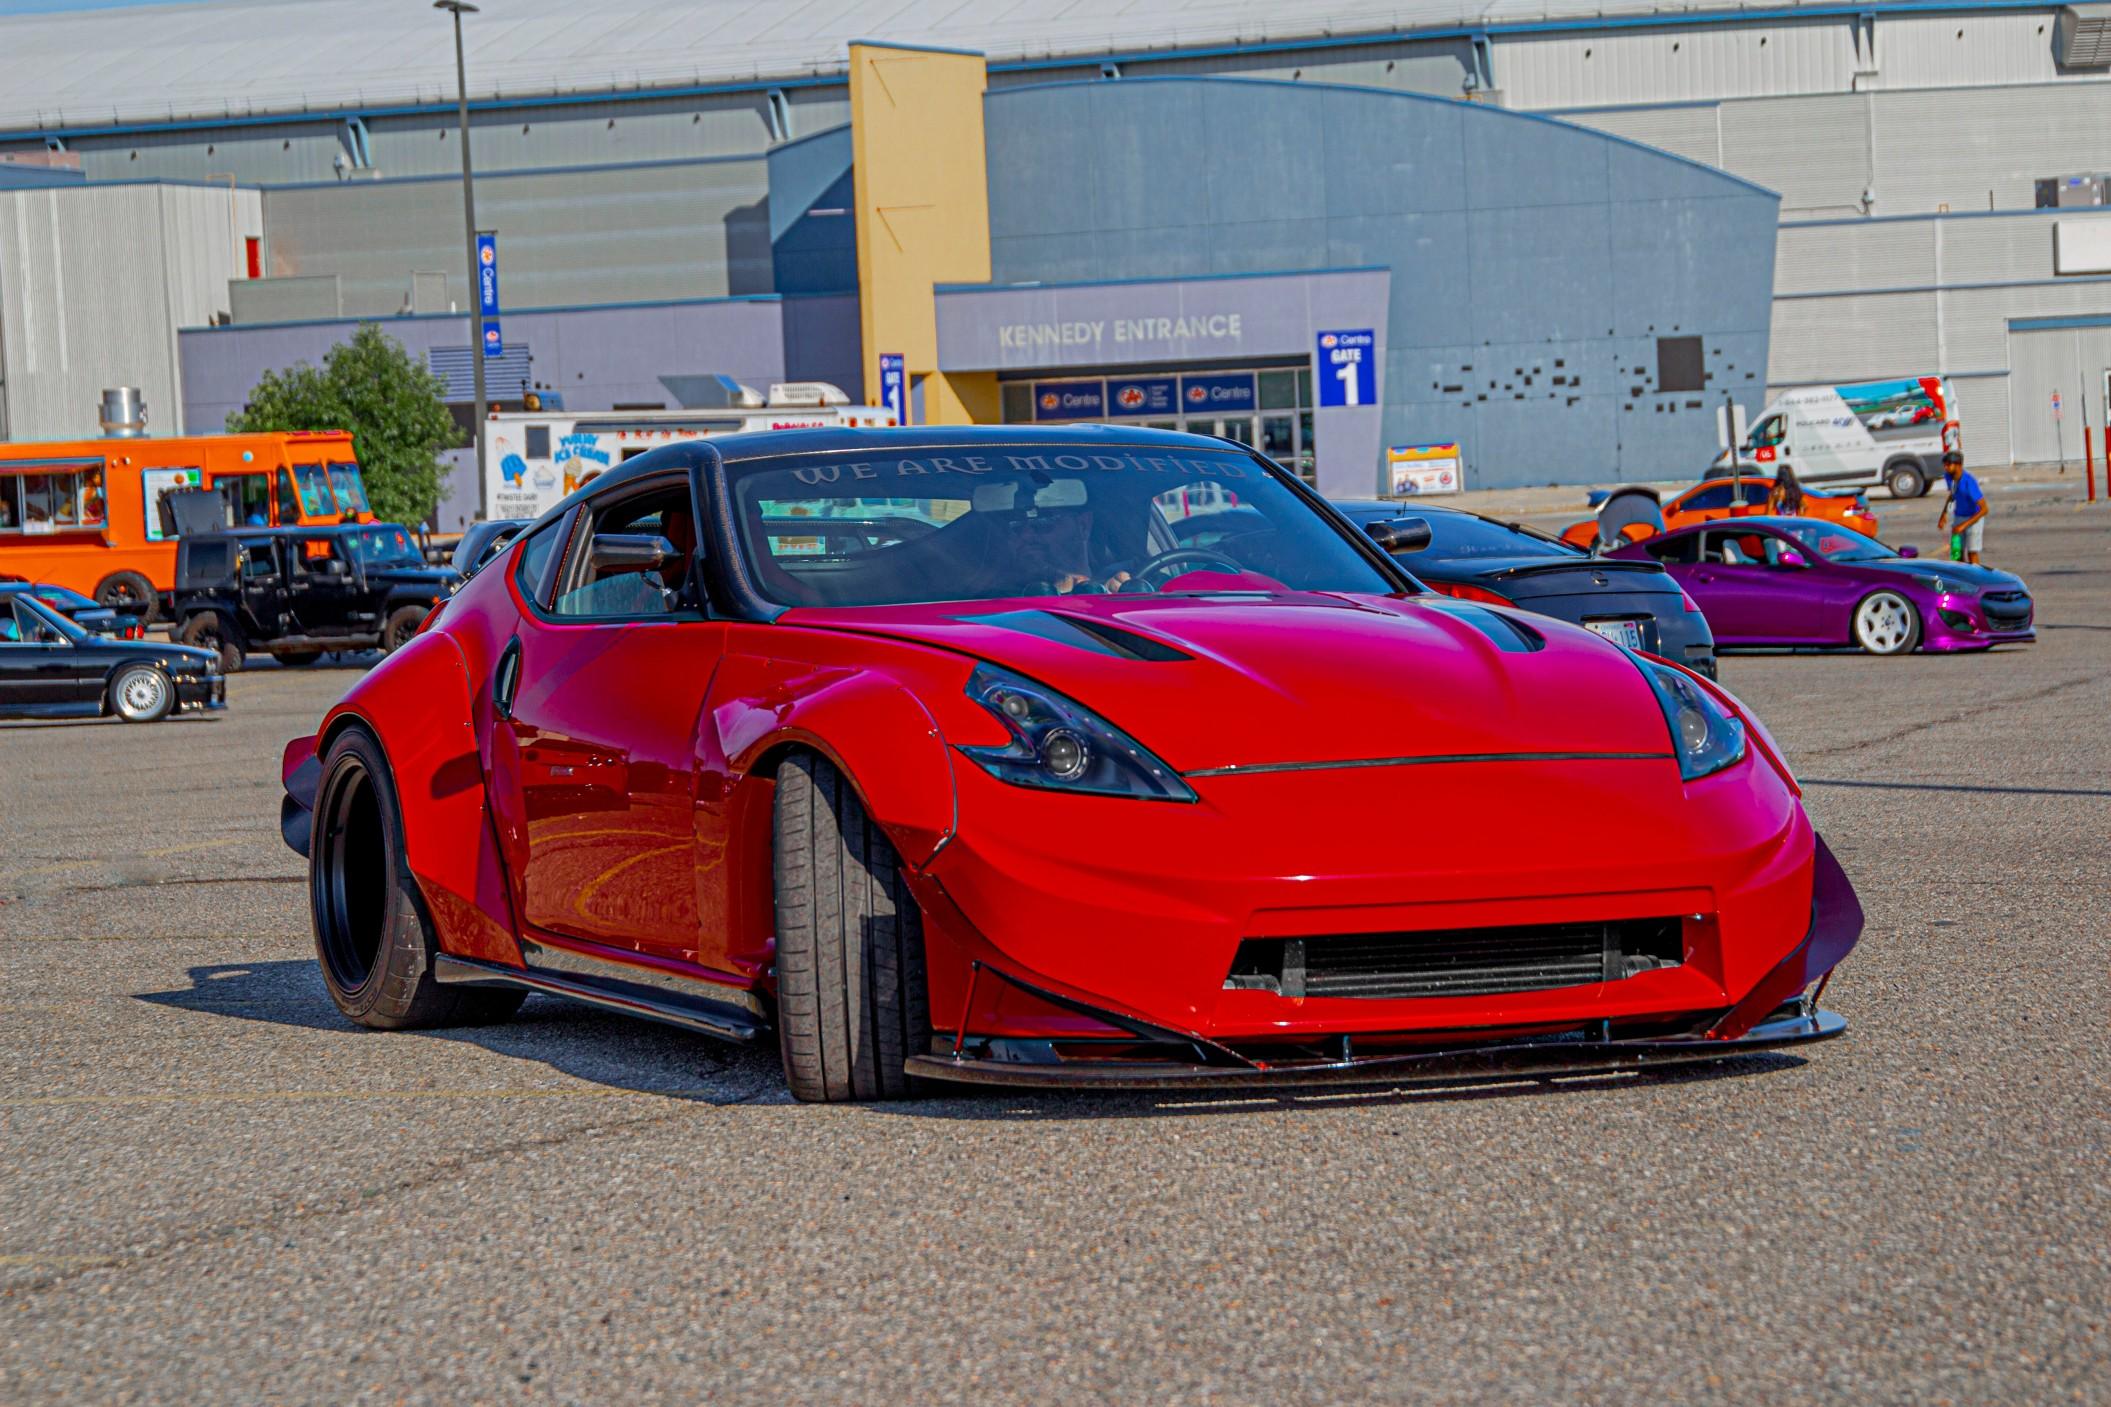 The Nissan 370Z widebody has a cult following of loyal fans.